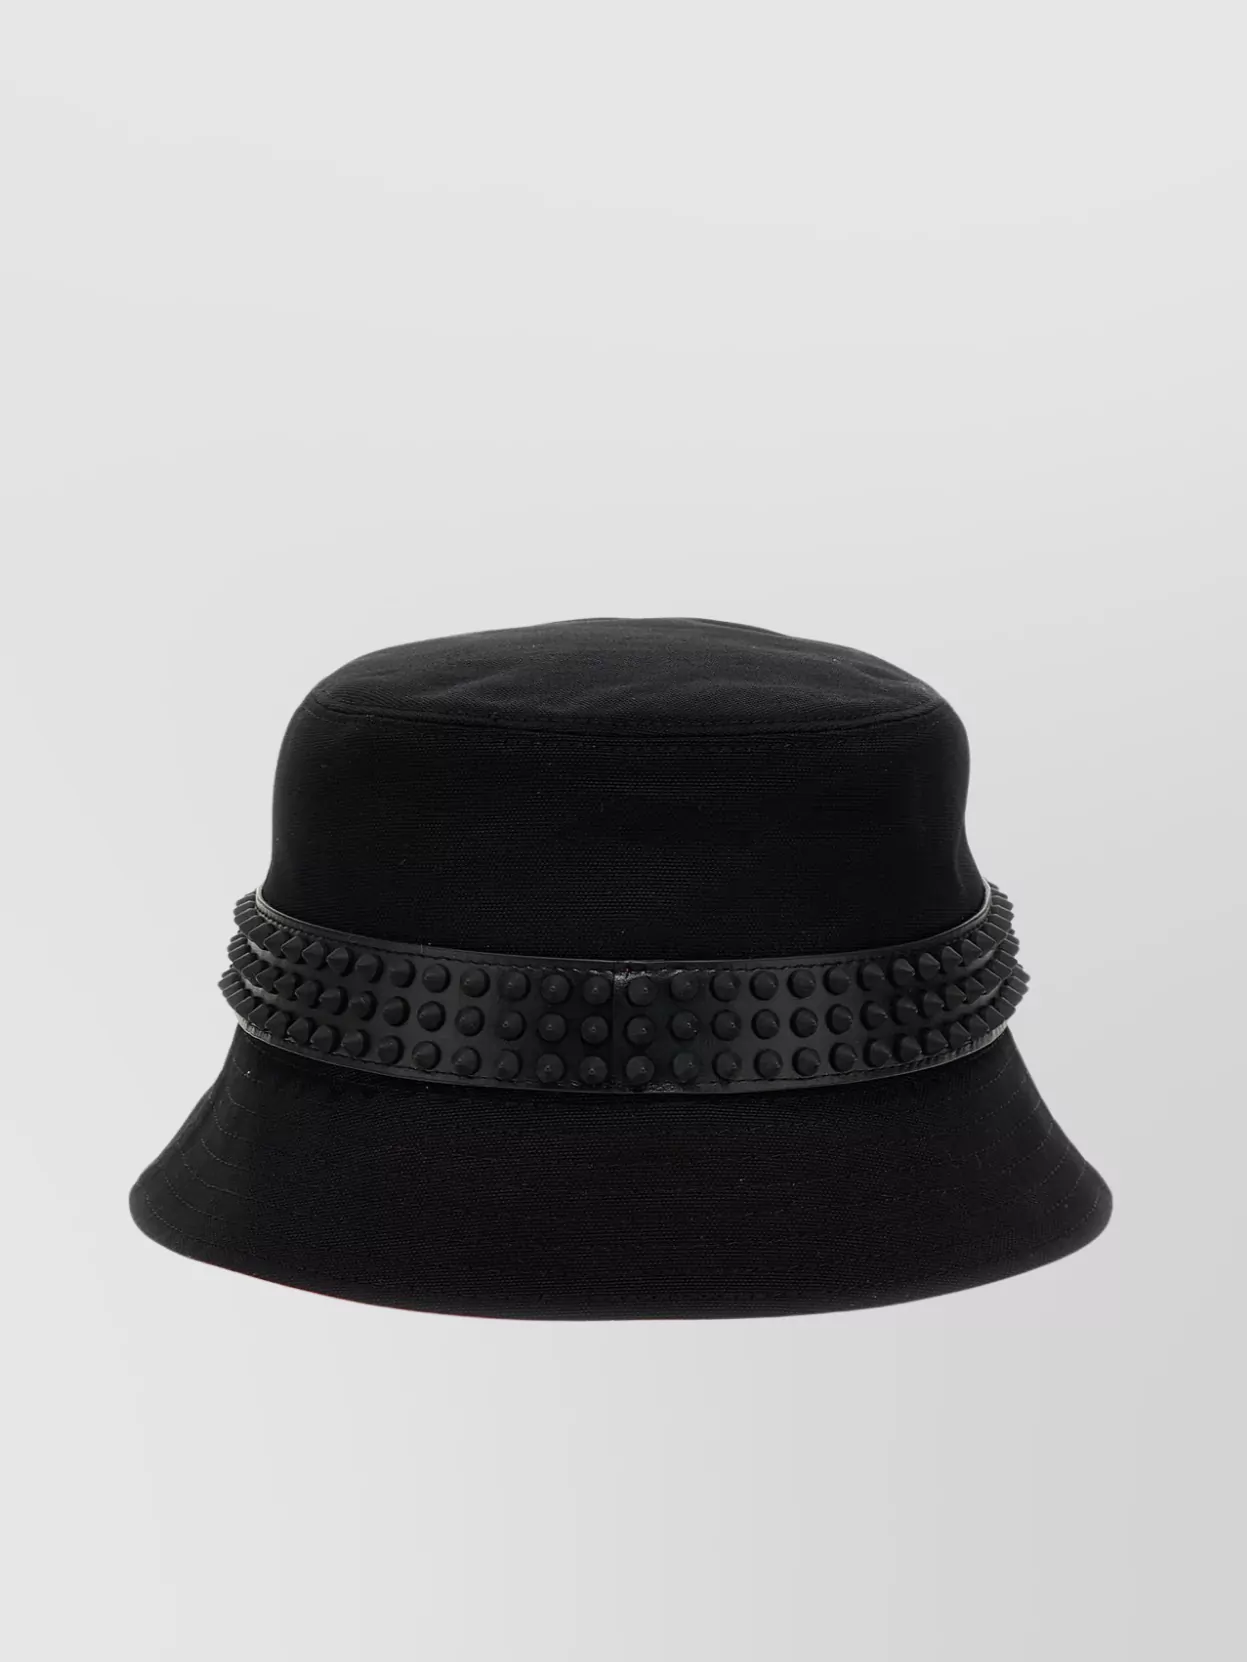 Christian Louboutin Spiked Band Bucket Hat